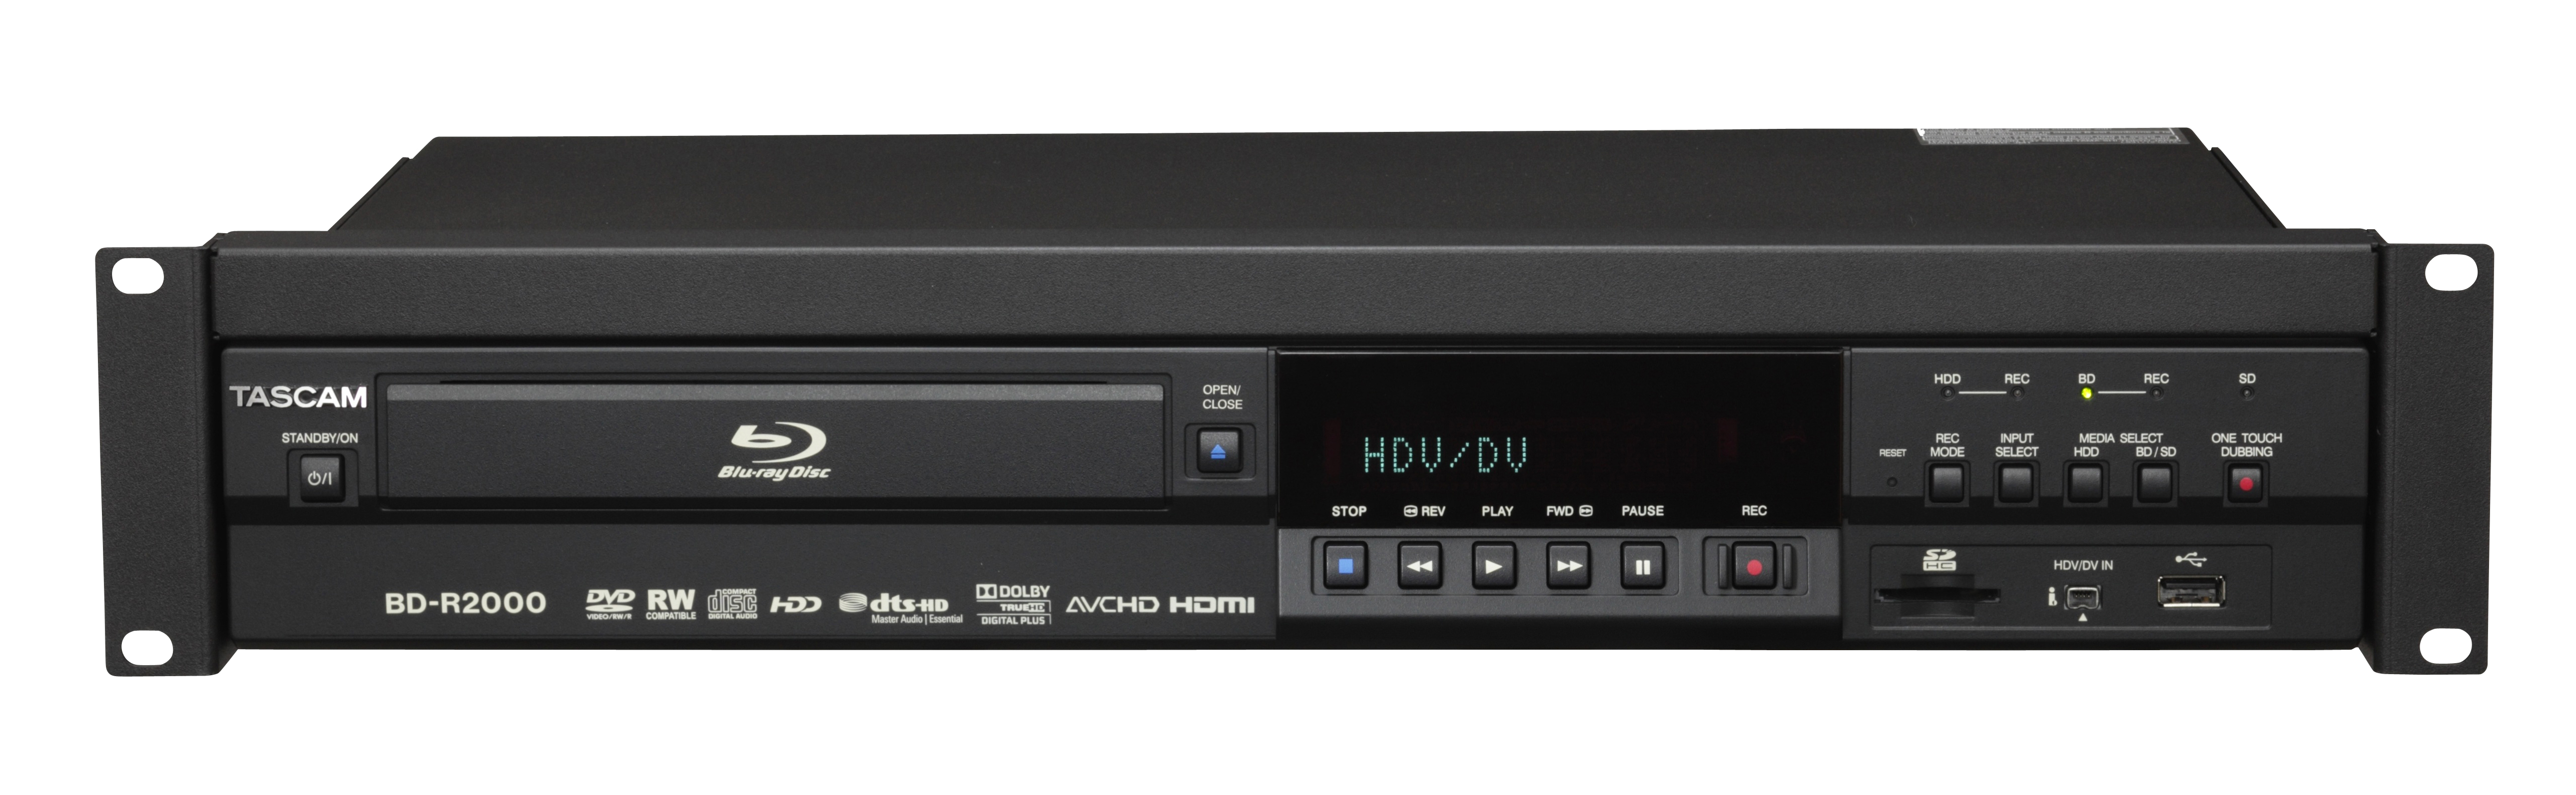 Tascam Tascam BD-R2000 DVD, HD, and Blu-Ray Recorder